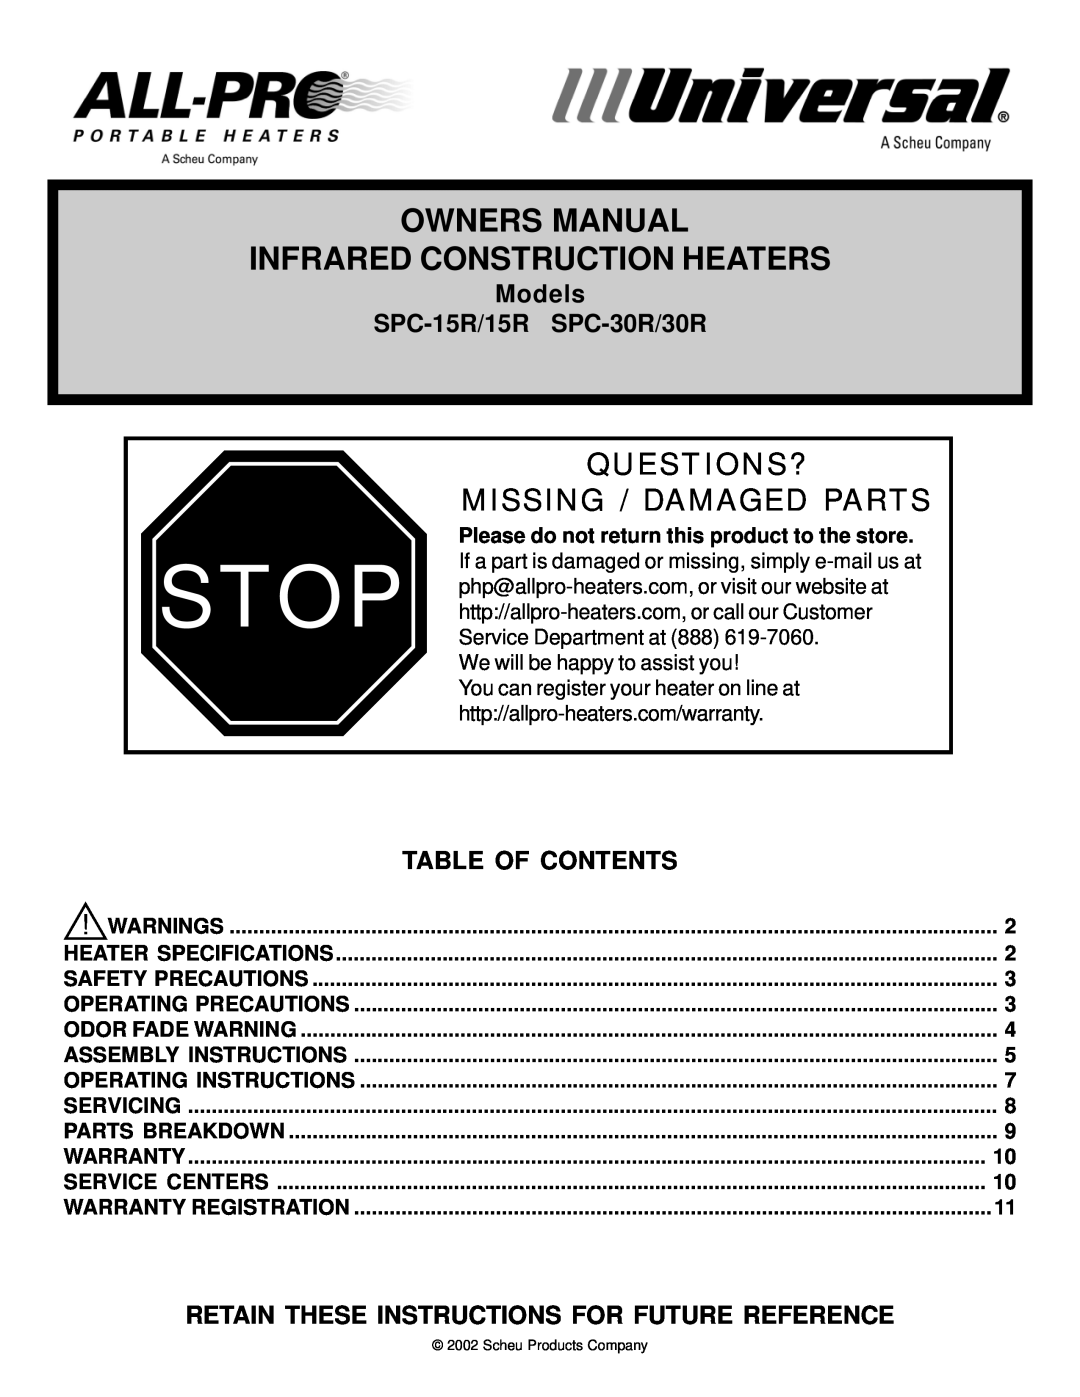 Universal owner manual Models SPC-15R/15R SPC-30R/30R, Retain These Instructions For Future Reference 